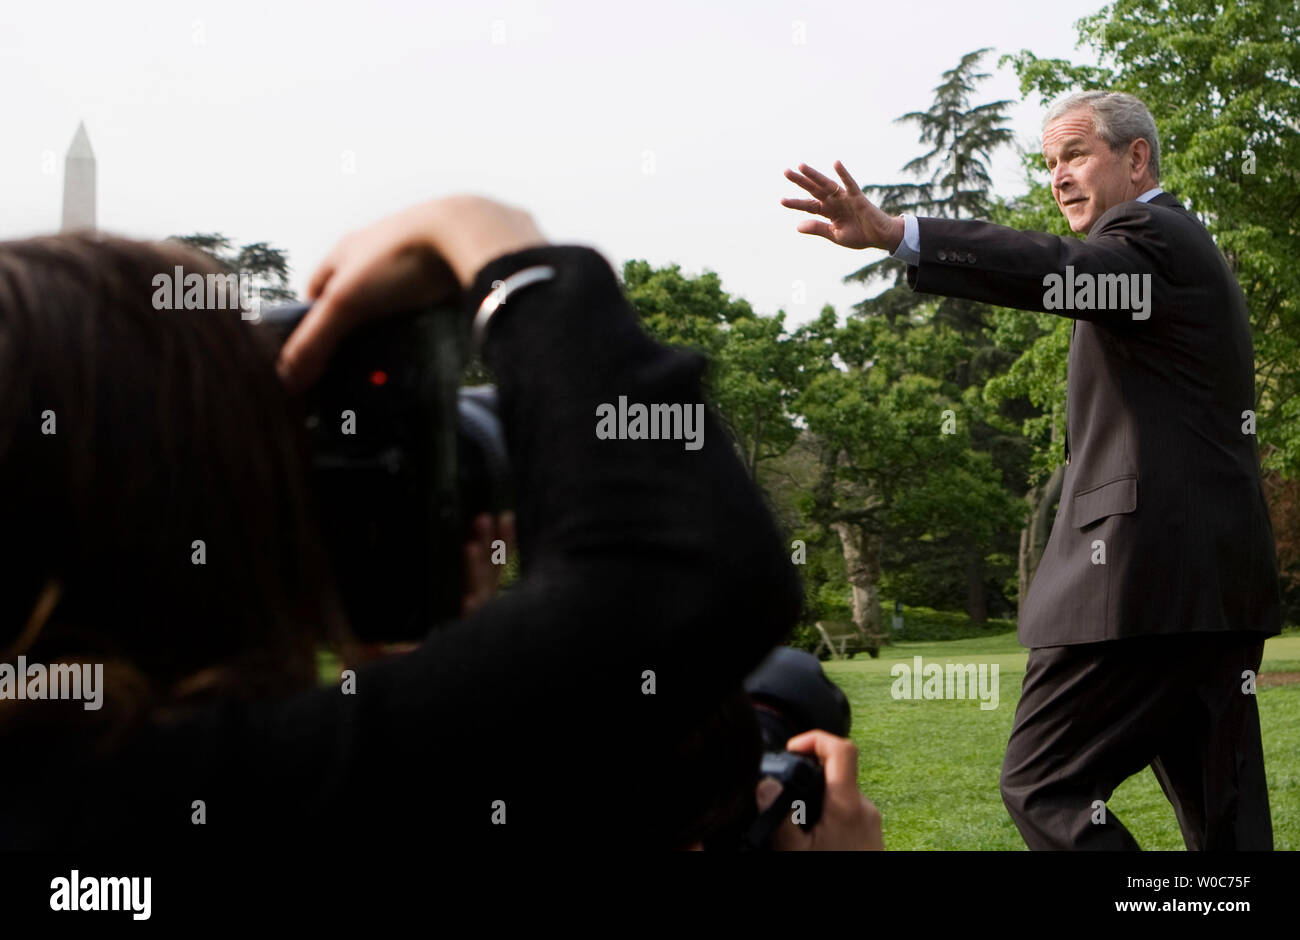 U.S. President George W. Bush waves to members of the media after making a statement on the economic stimulus rebate checks before departing the White House in Washington on April 25, 2008. (UPI Photo/Patrick D. McDermott) Stock Photo